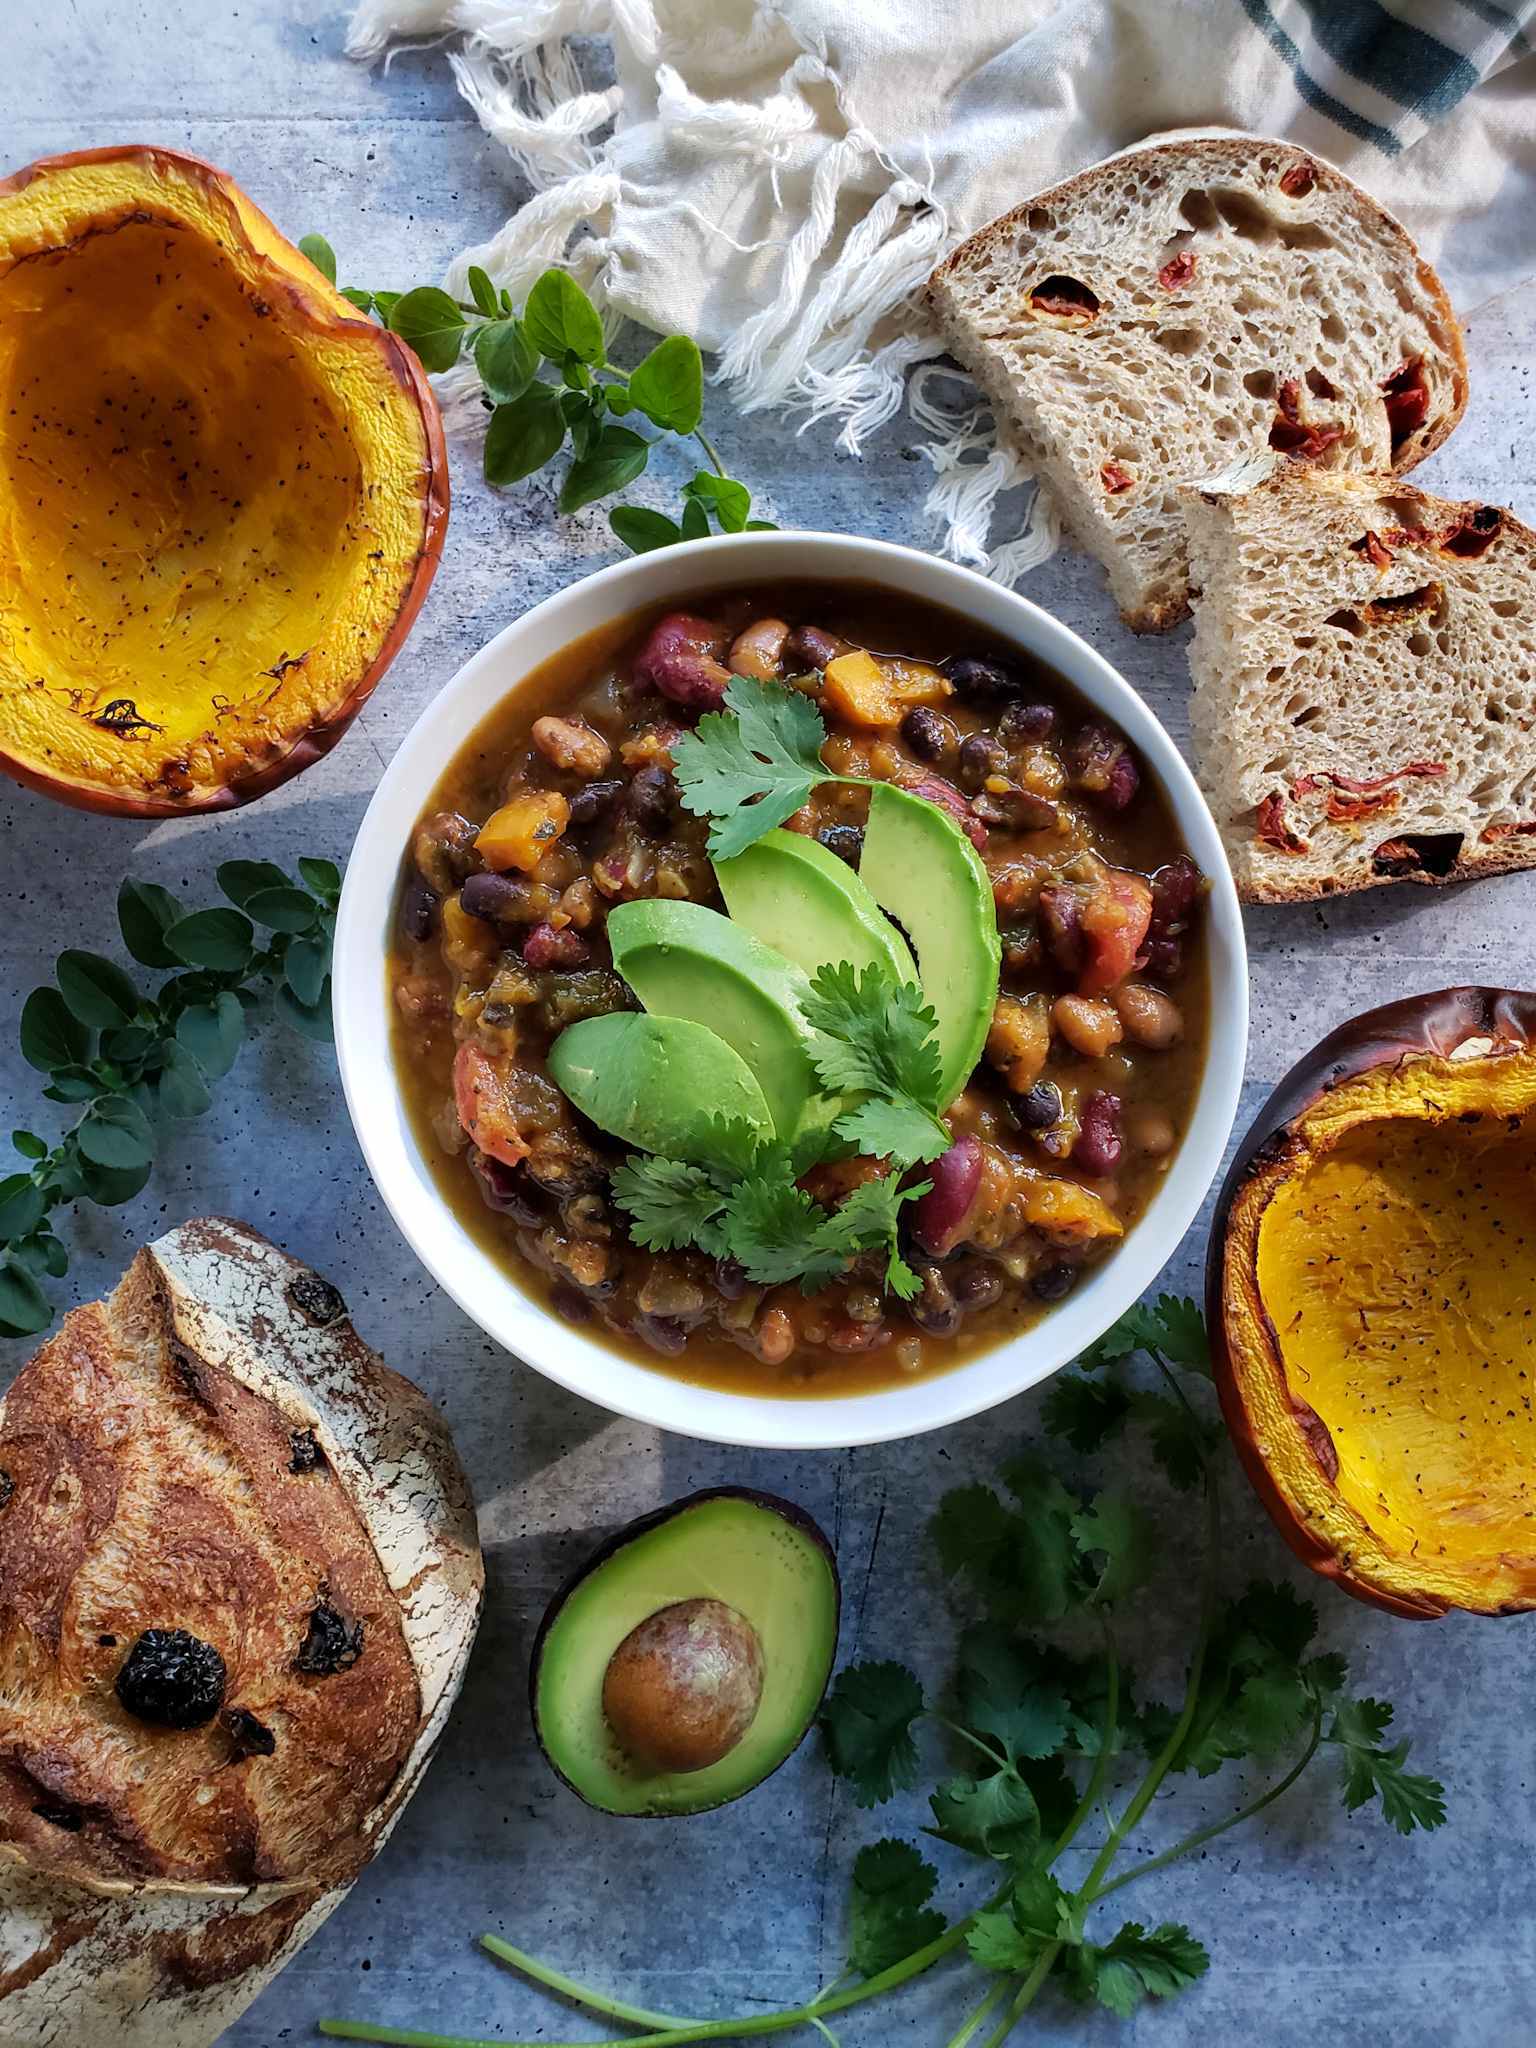 A bowl of vegan chilli with three types of beans and roasted pumpkin is the feature. It is garnished with sliced avocados that are arranged as one would hold a hand of cards with a few sprigs of cilantro. Arranged around the bowl is half of a roasted pumpkin, sliced sundried tomato sourdough bread, another half roasted pumpkin, half an avocado with the pit remaining, and half a loaf of sundried tomato sourdough bread.